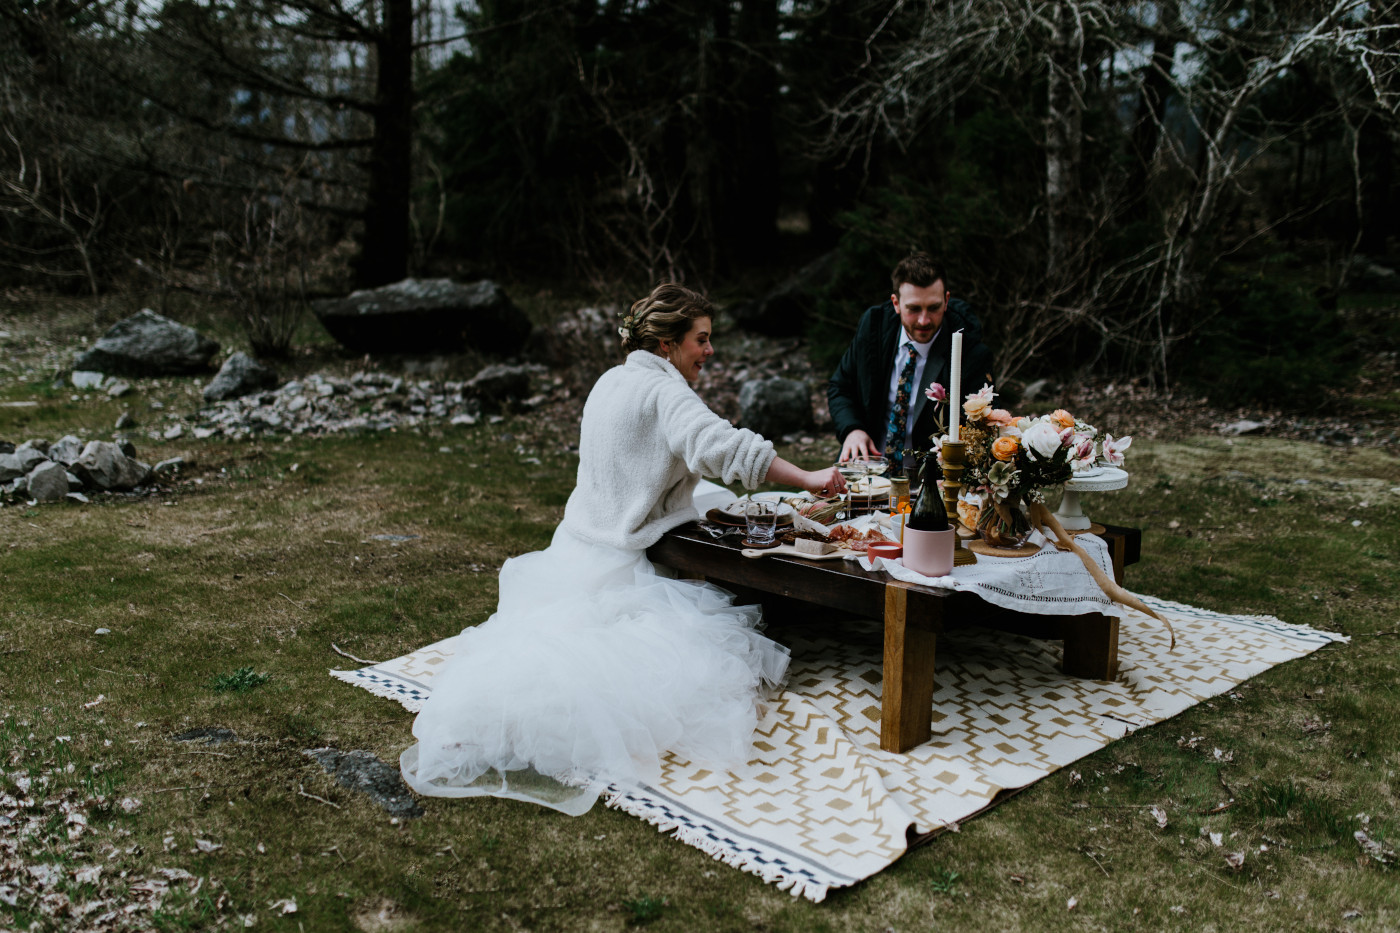 Allison and Lennie enjoy their picnic. Elopement photography at Columbia River Gorge by Sienna Plus Josh.